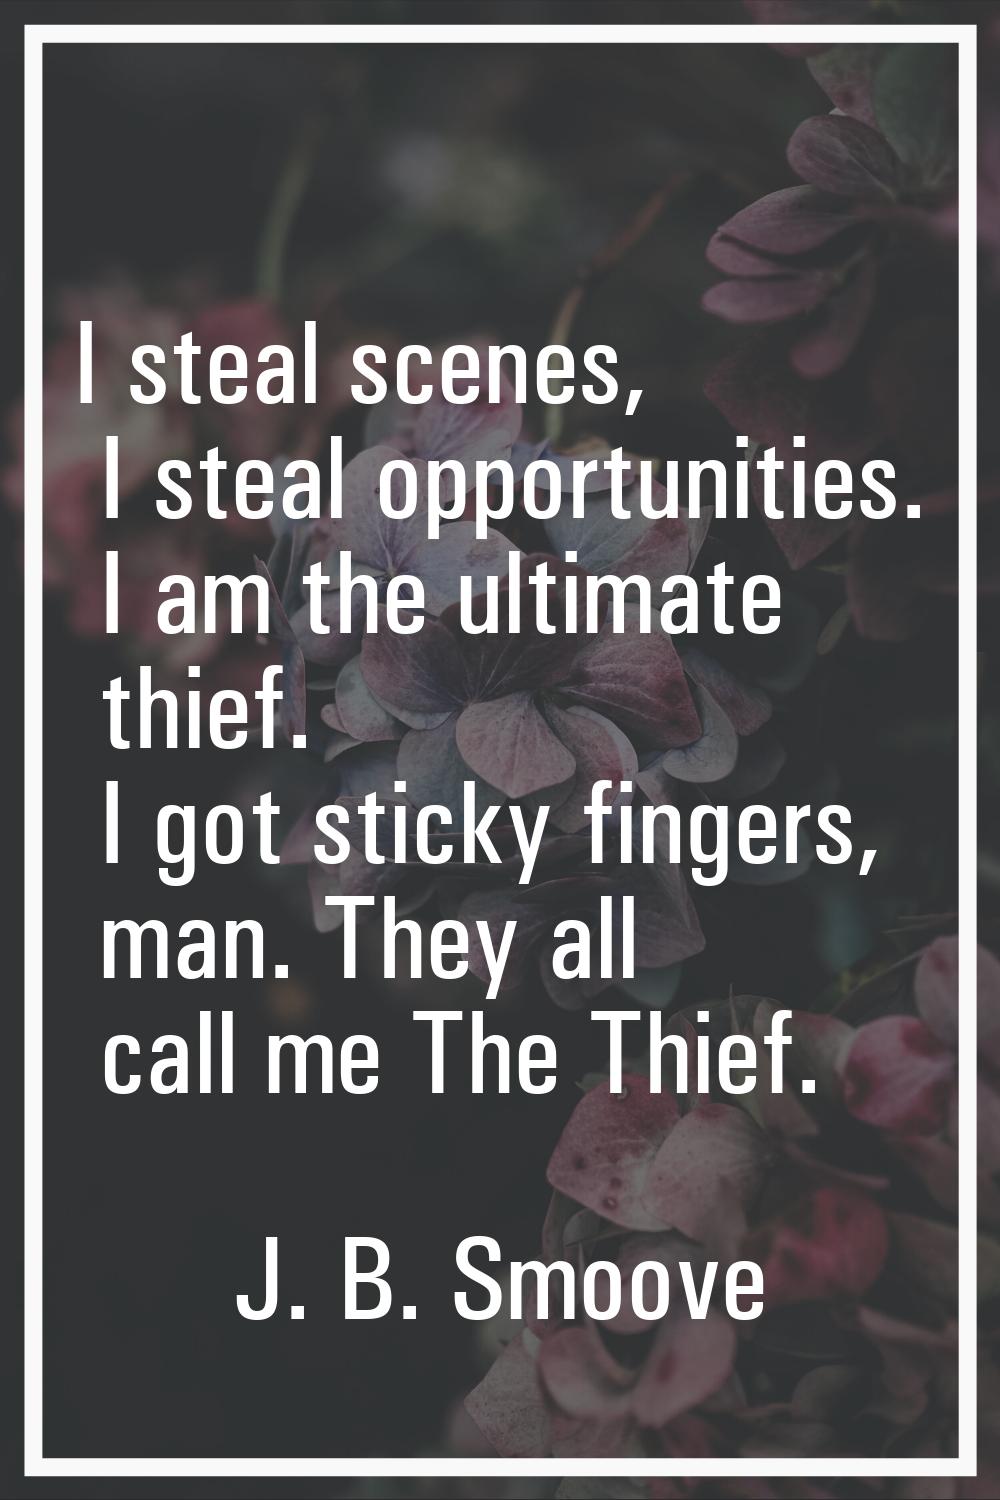 I steal scenes, I steal opportunities. I am the ultimate thief. I got sticky fingers, man. They all